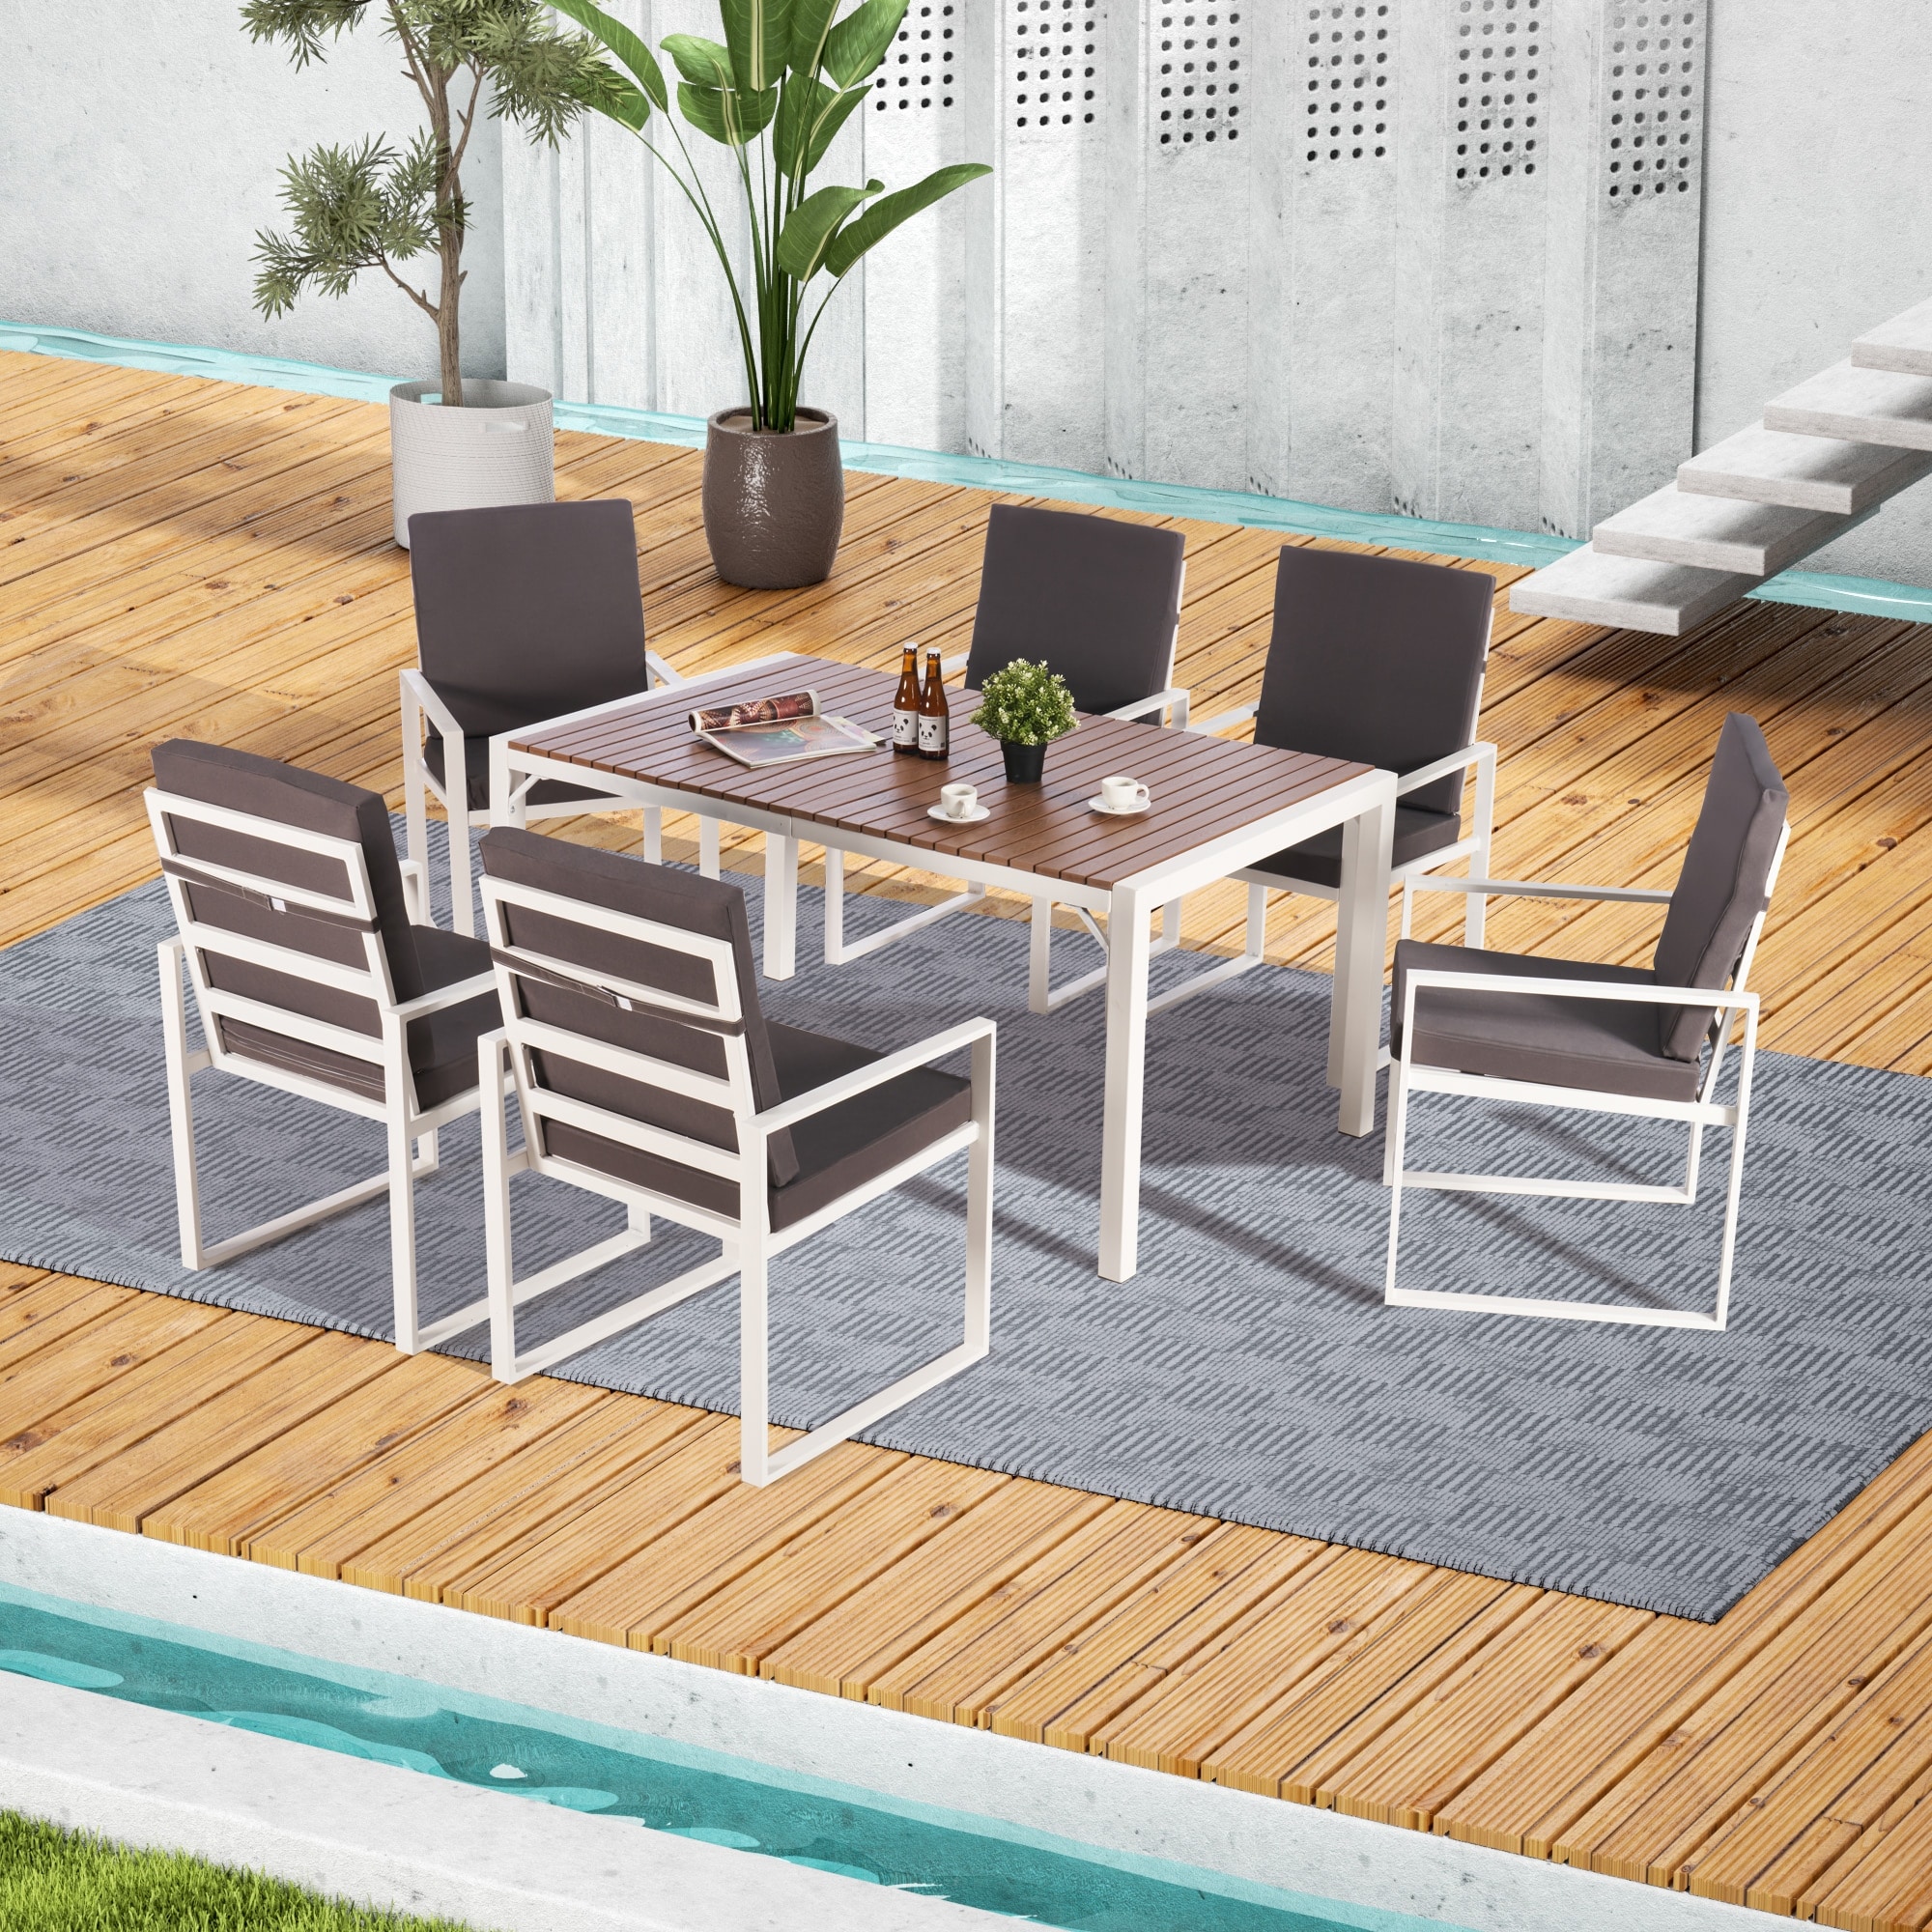 7 Piece Outdoor Furniture Patio Sets Dining Chair Table Sets  Conversation Set With Polywood Table Top - 0.1w X 0.1l X 0.1h